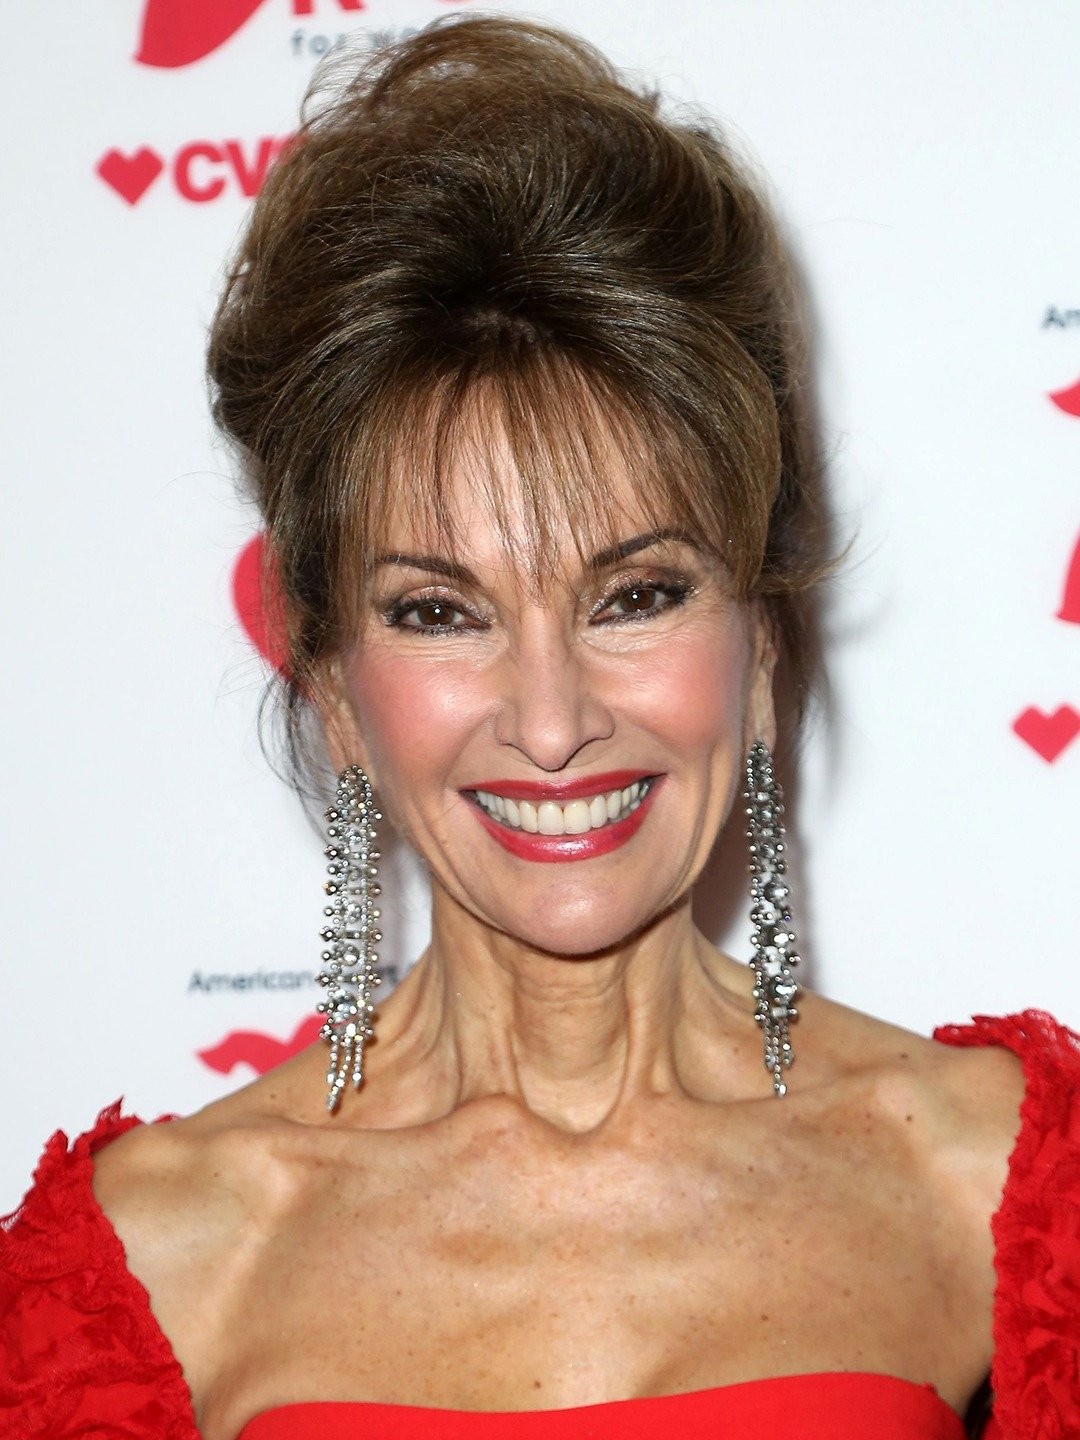 Susan Lucci alive and kicking